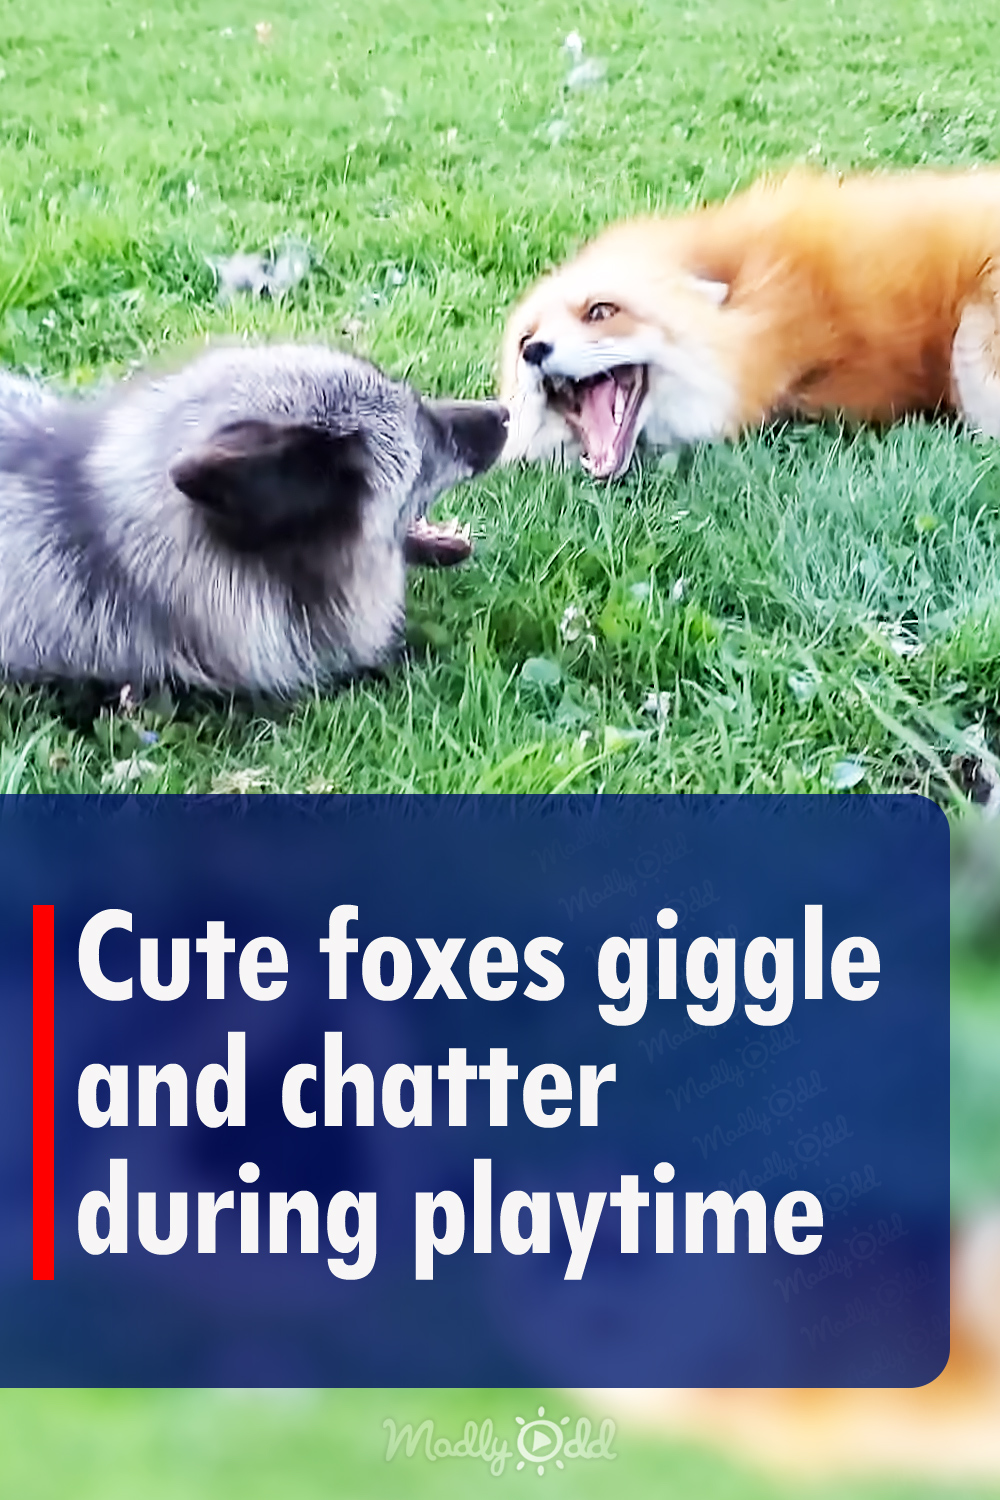 Cute foxes giggle and chatter during playtime